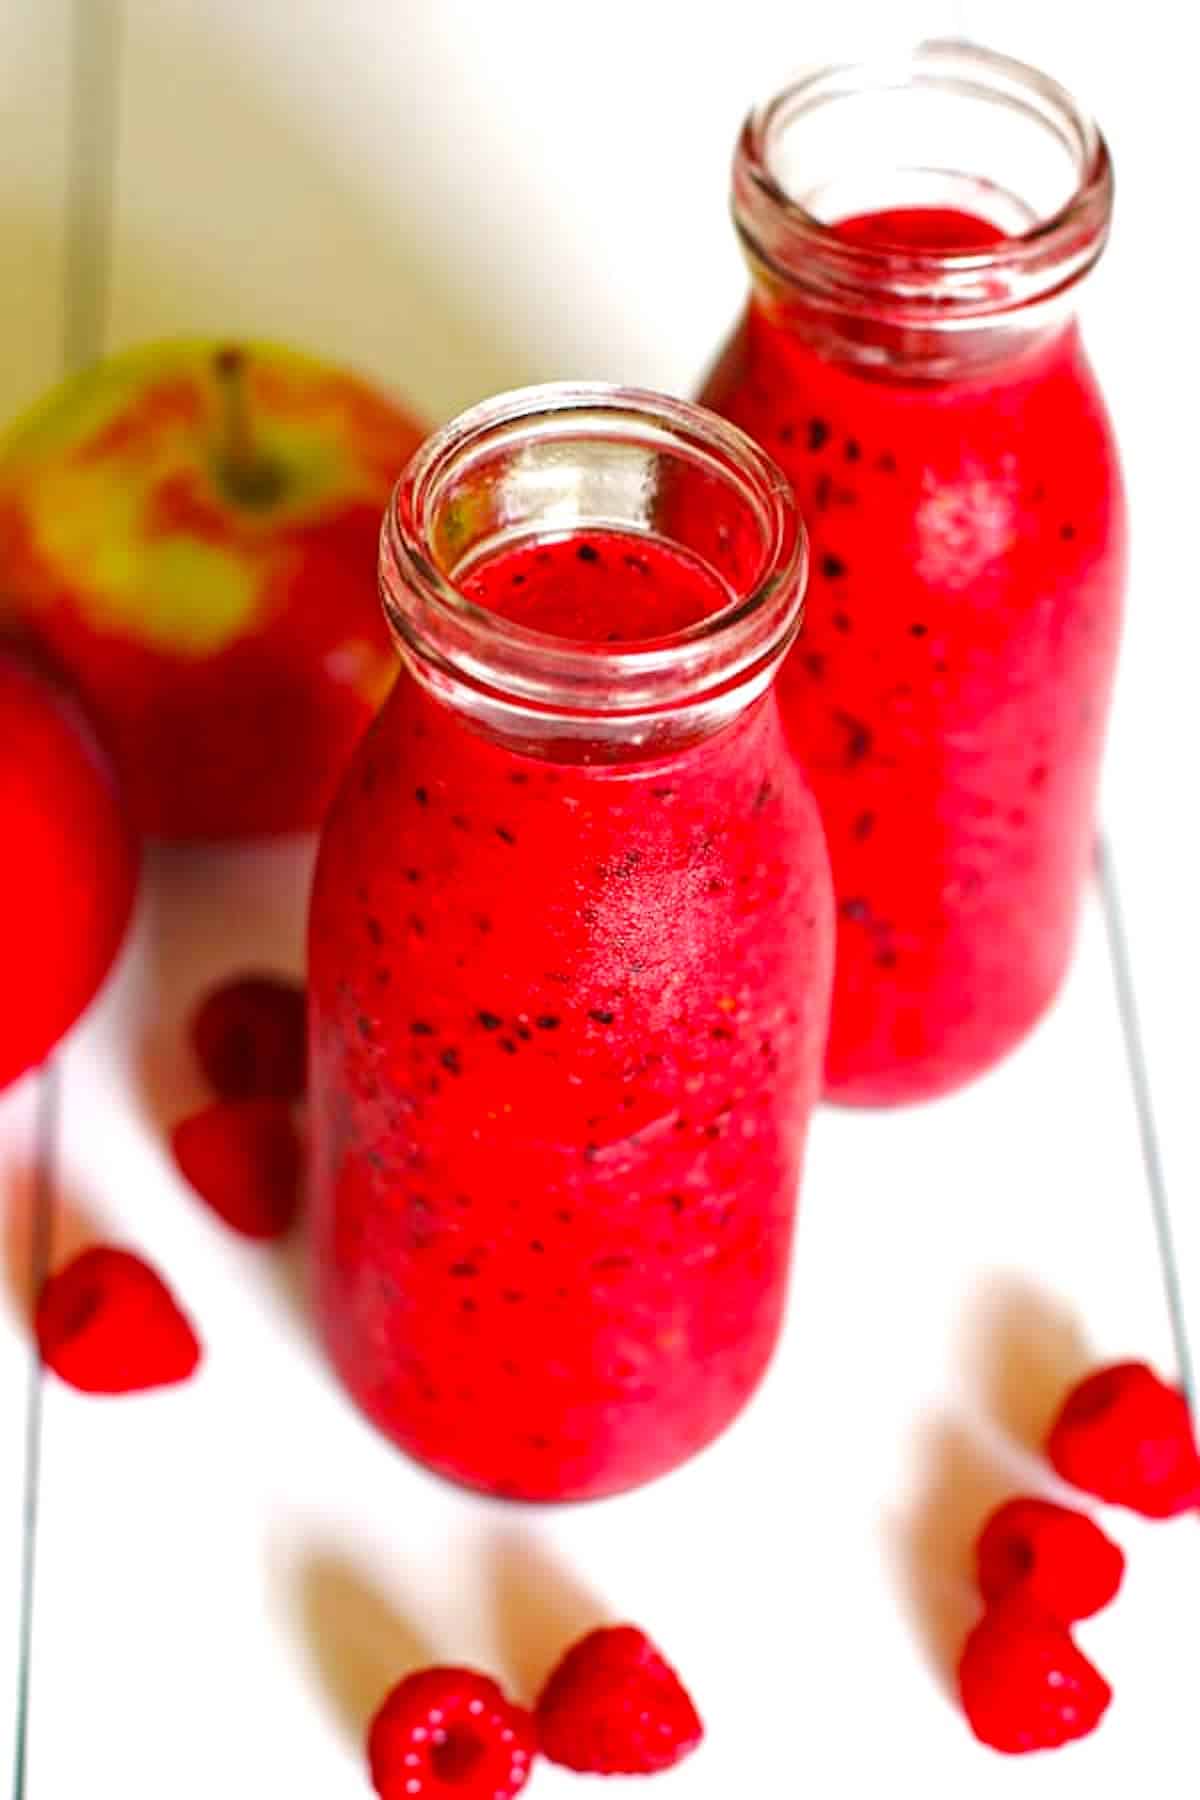 A red smoothie made of apples and berries that is sitting on a white table.